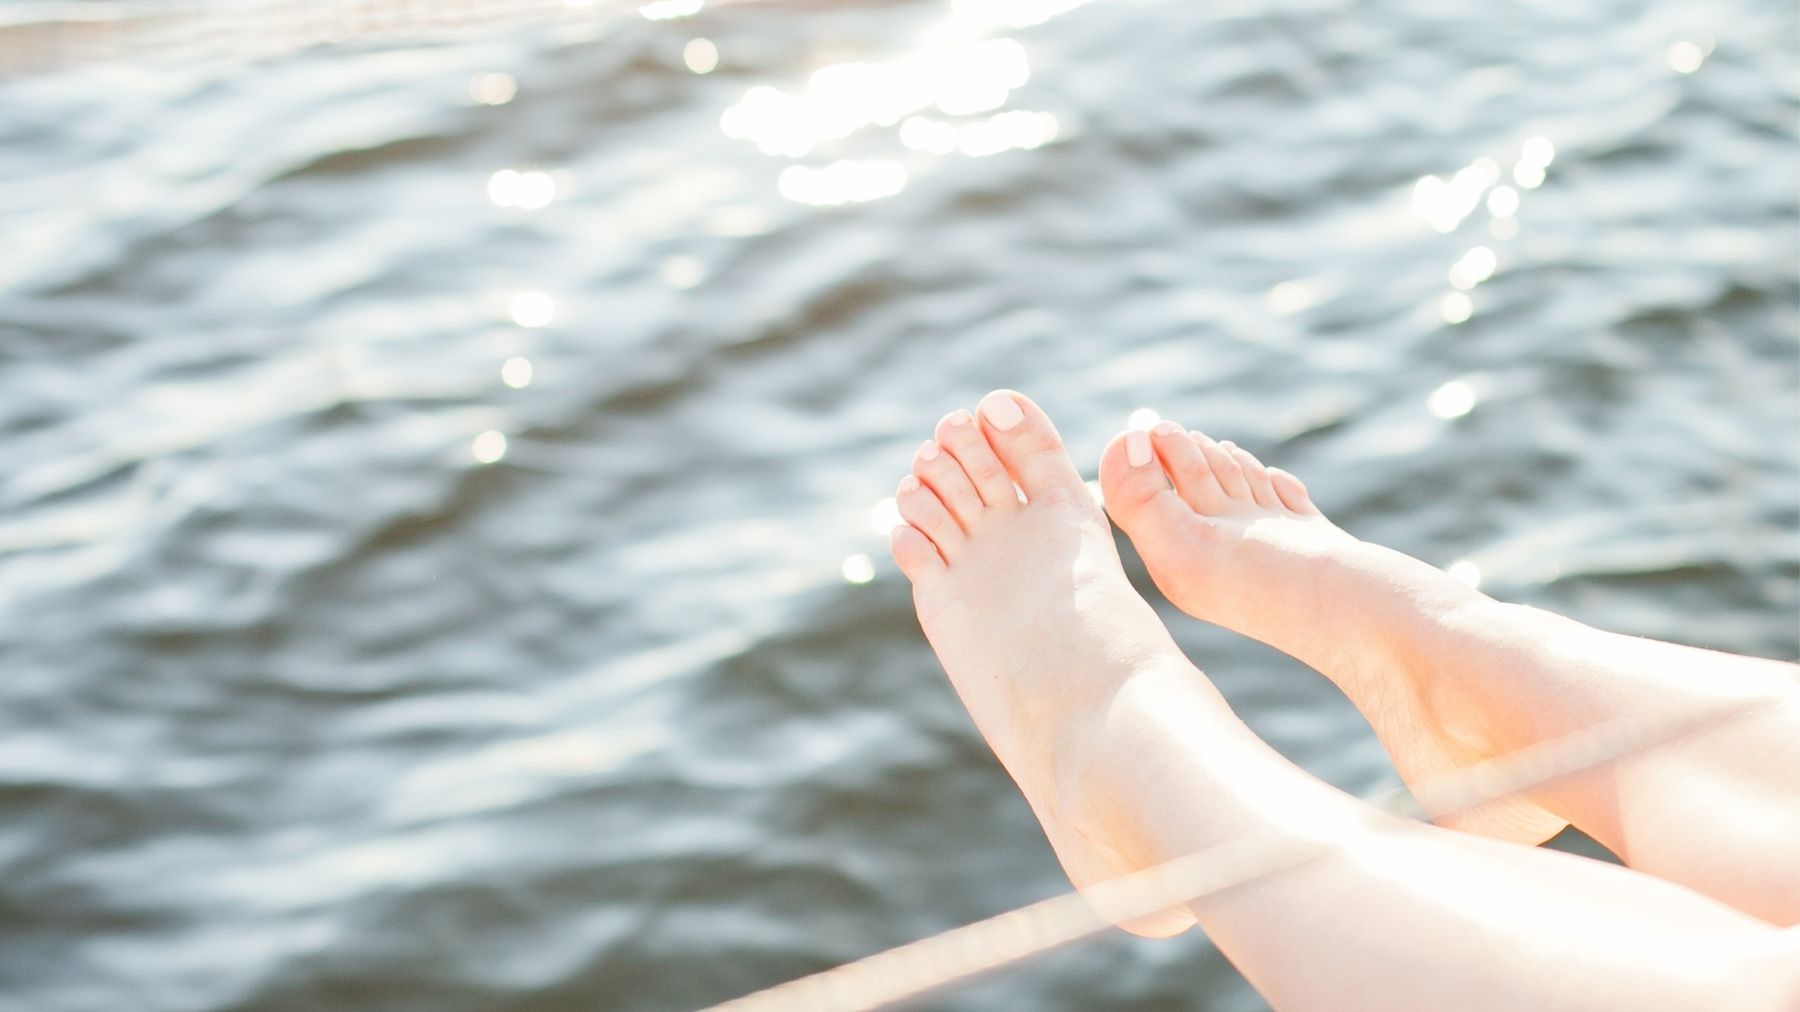 How to Remove Dead Skin from Feet